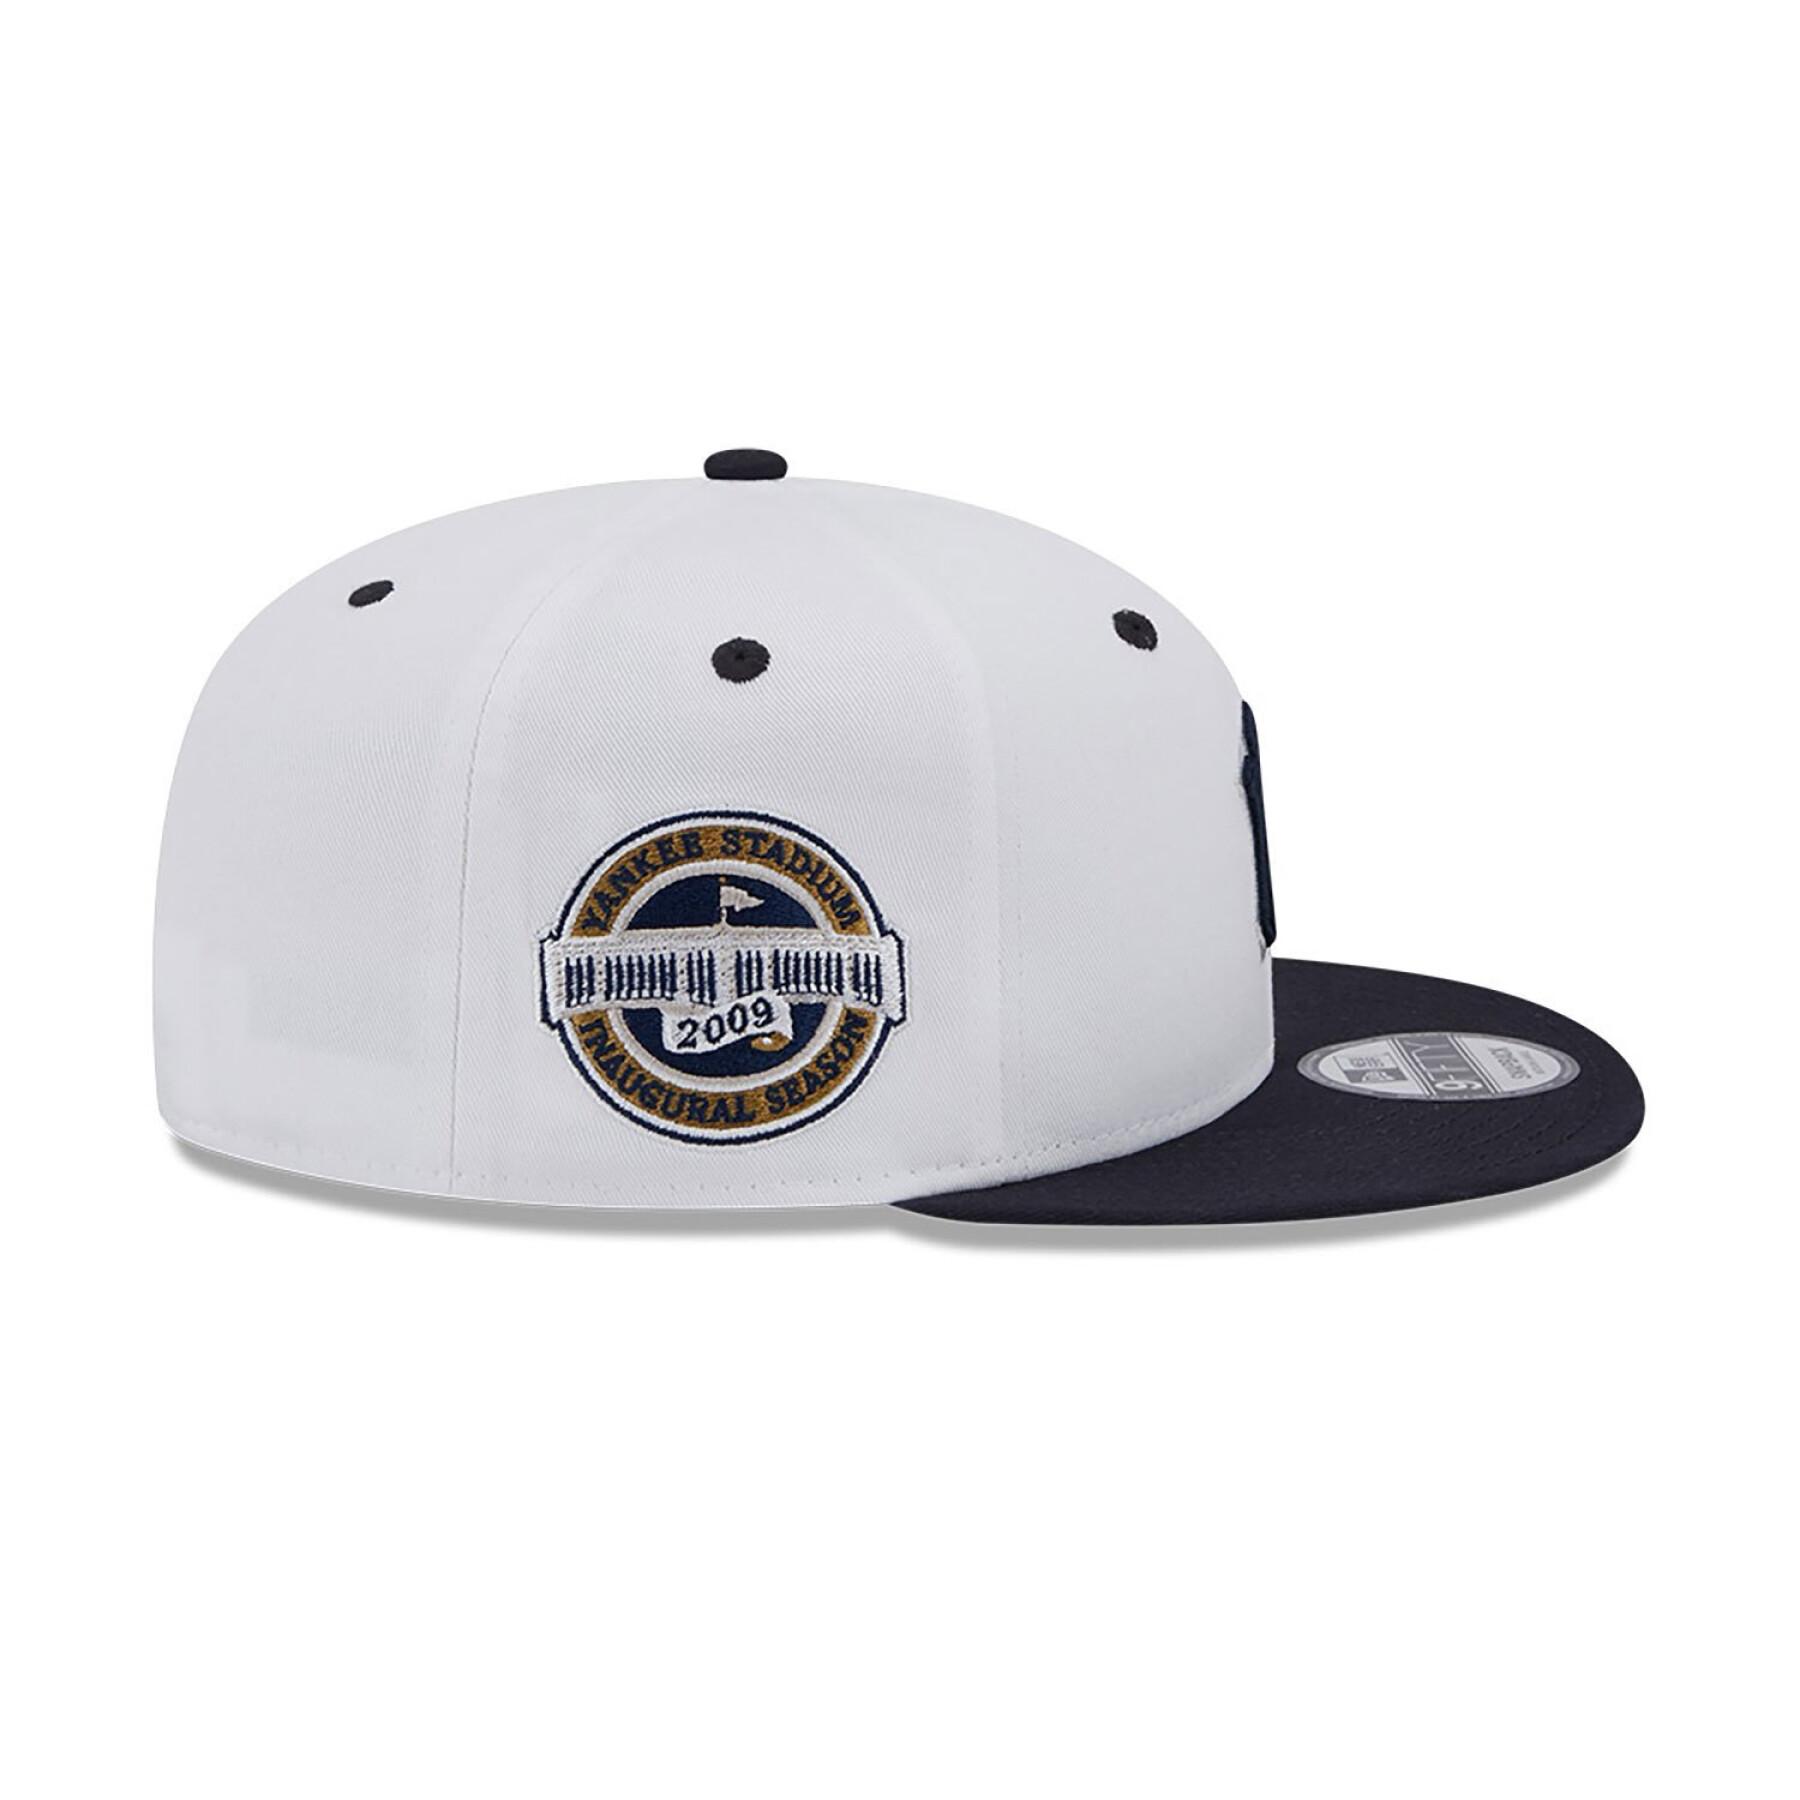 Casquette 9fifty New York Yankees Crown Patch